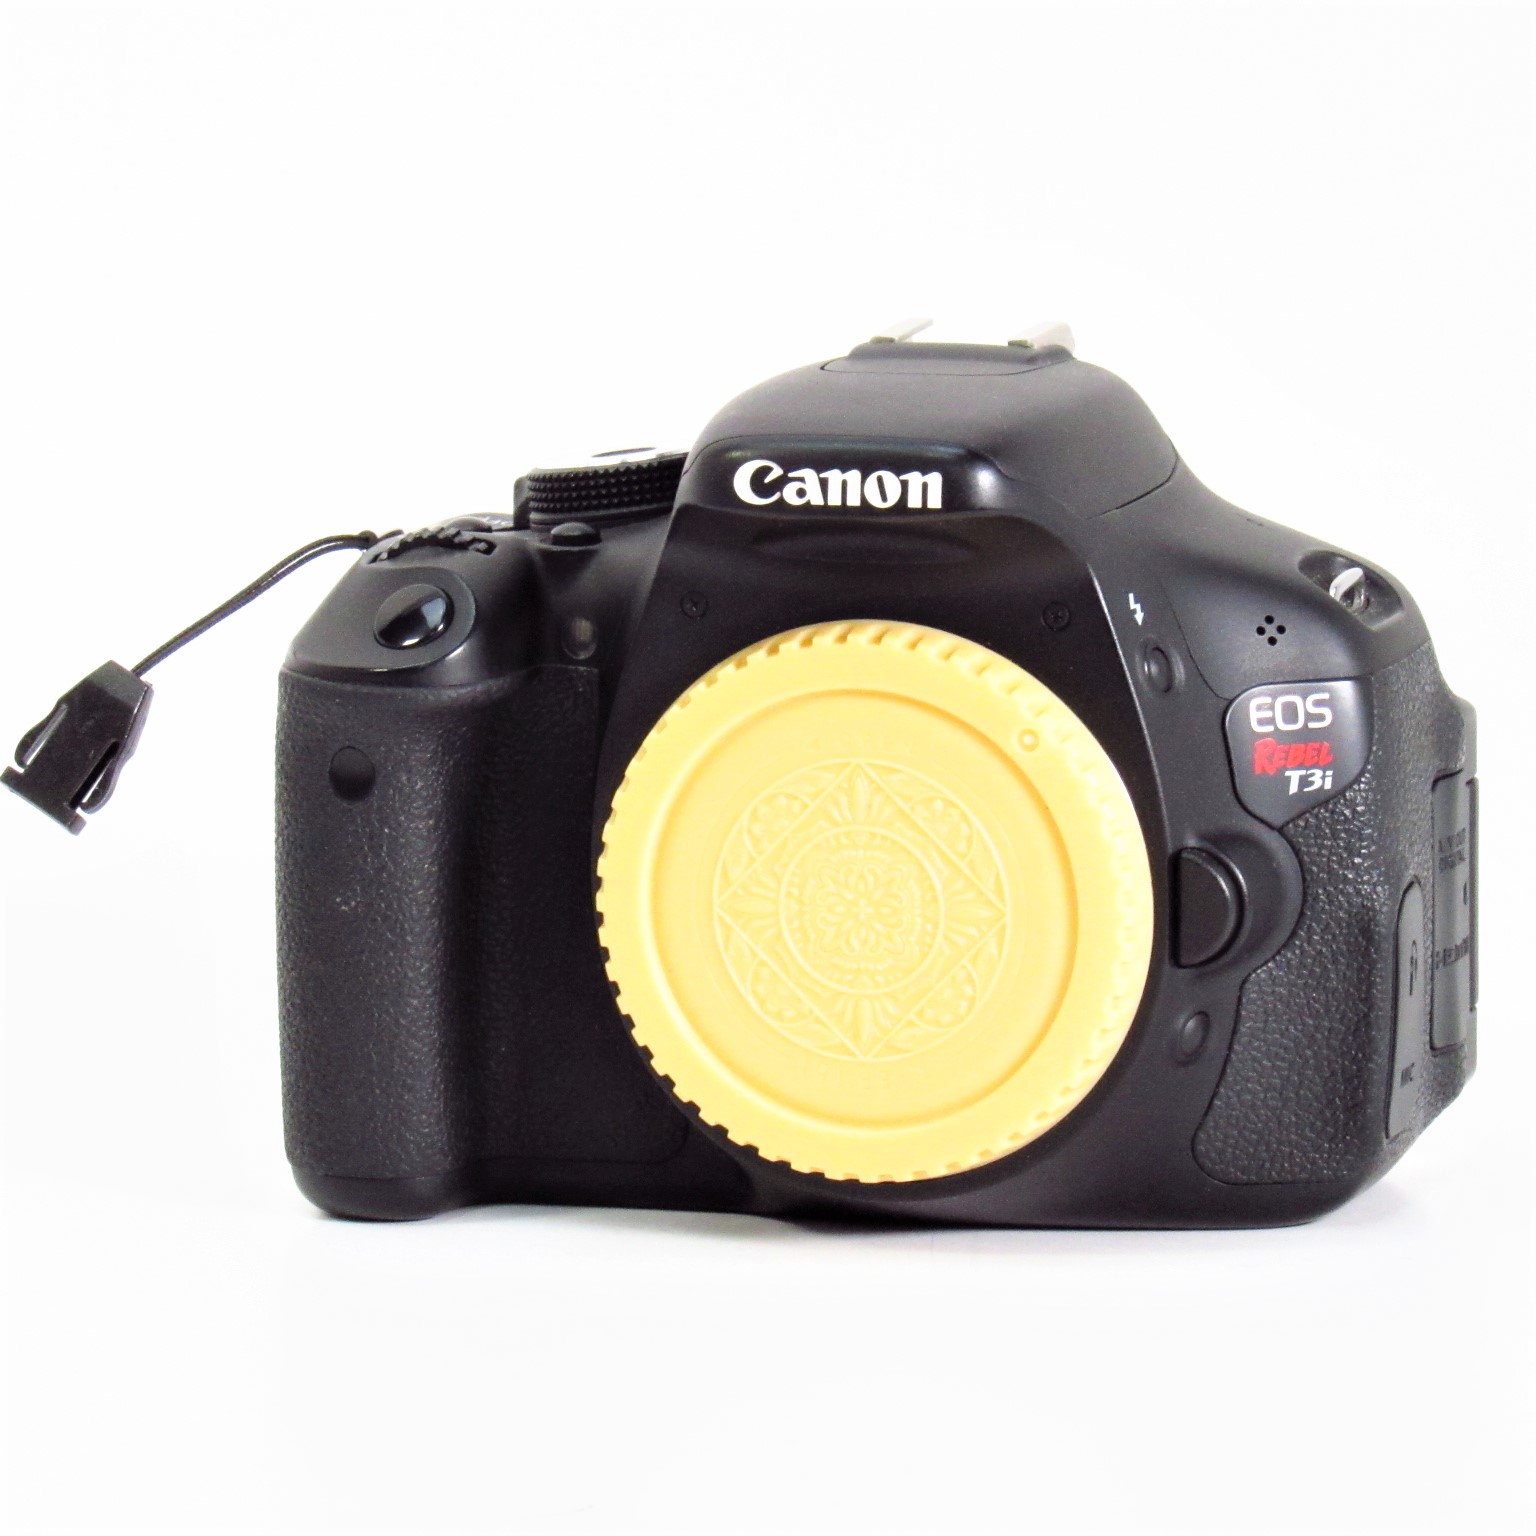 Canon Eos Rebel T3i Ds126311 Ef S 18mp Digital Slr Camera Body Only